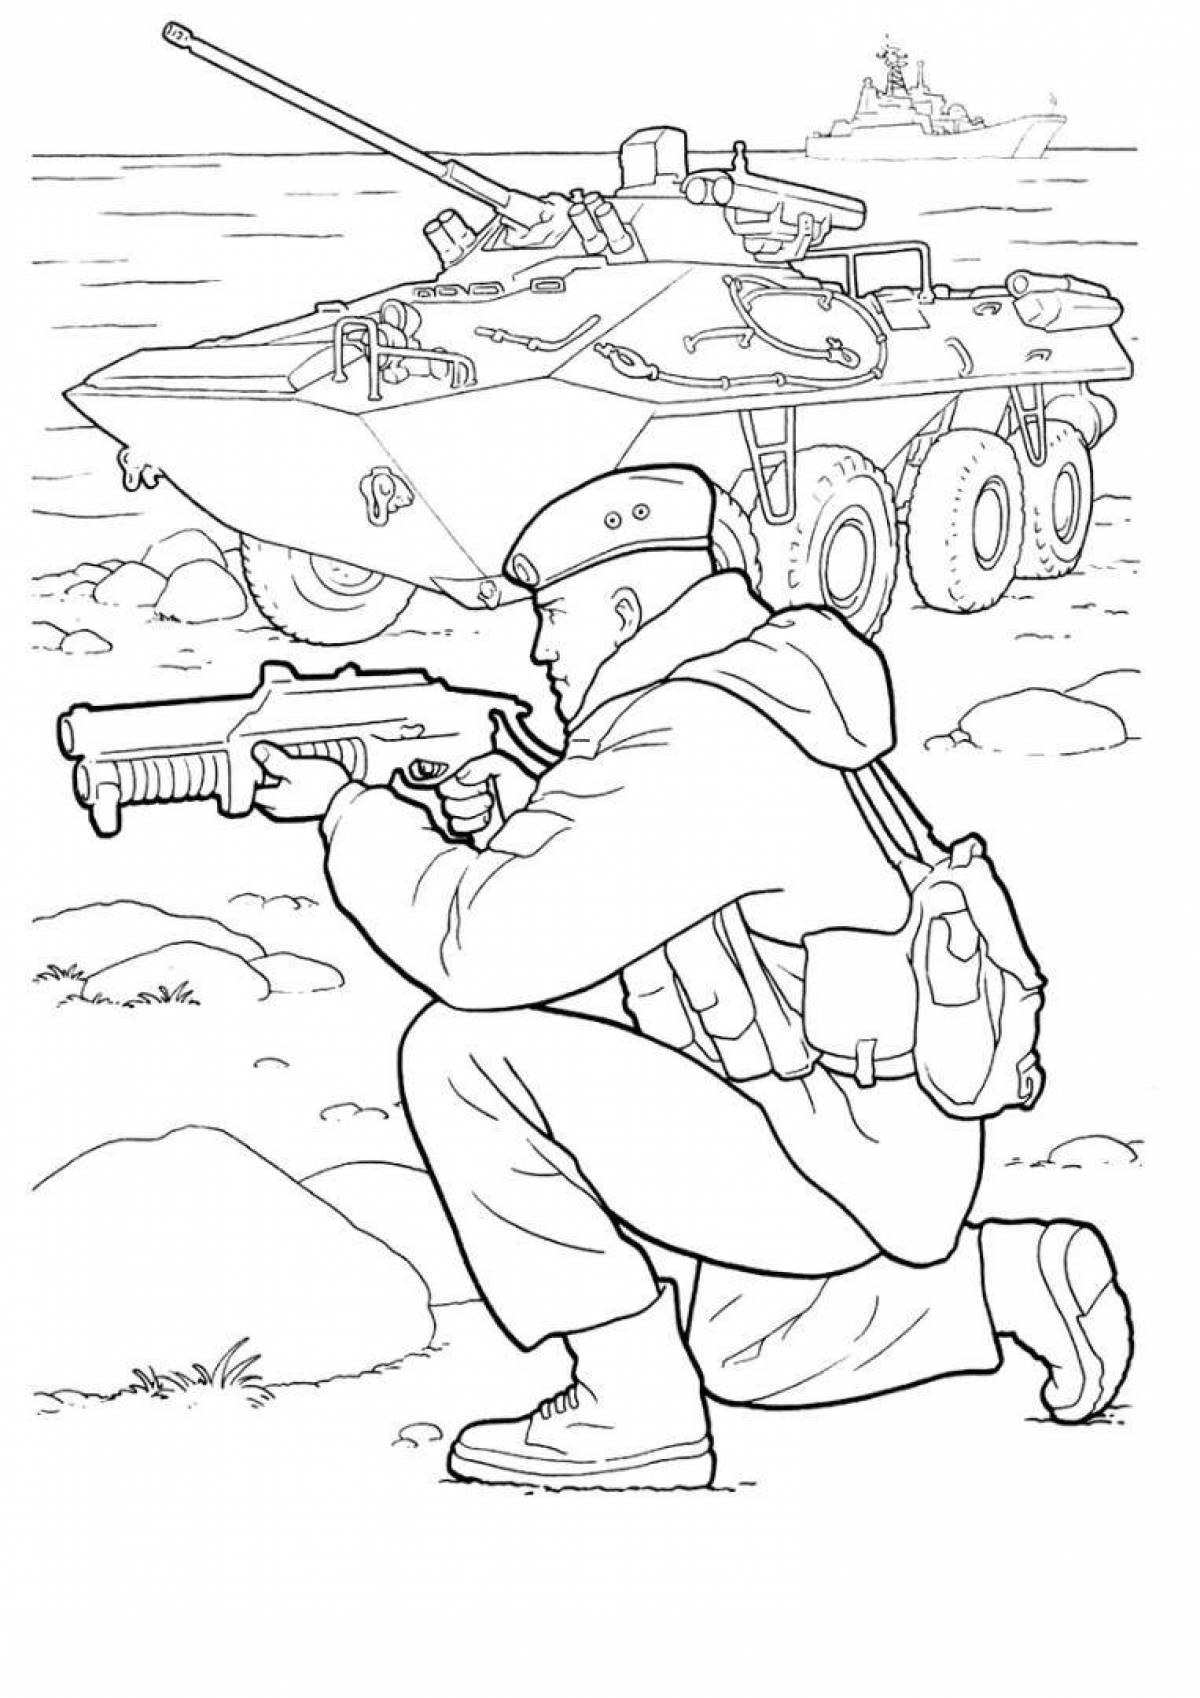 Colorful infantry coloring page for kids